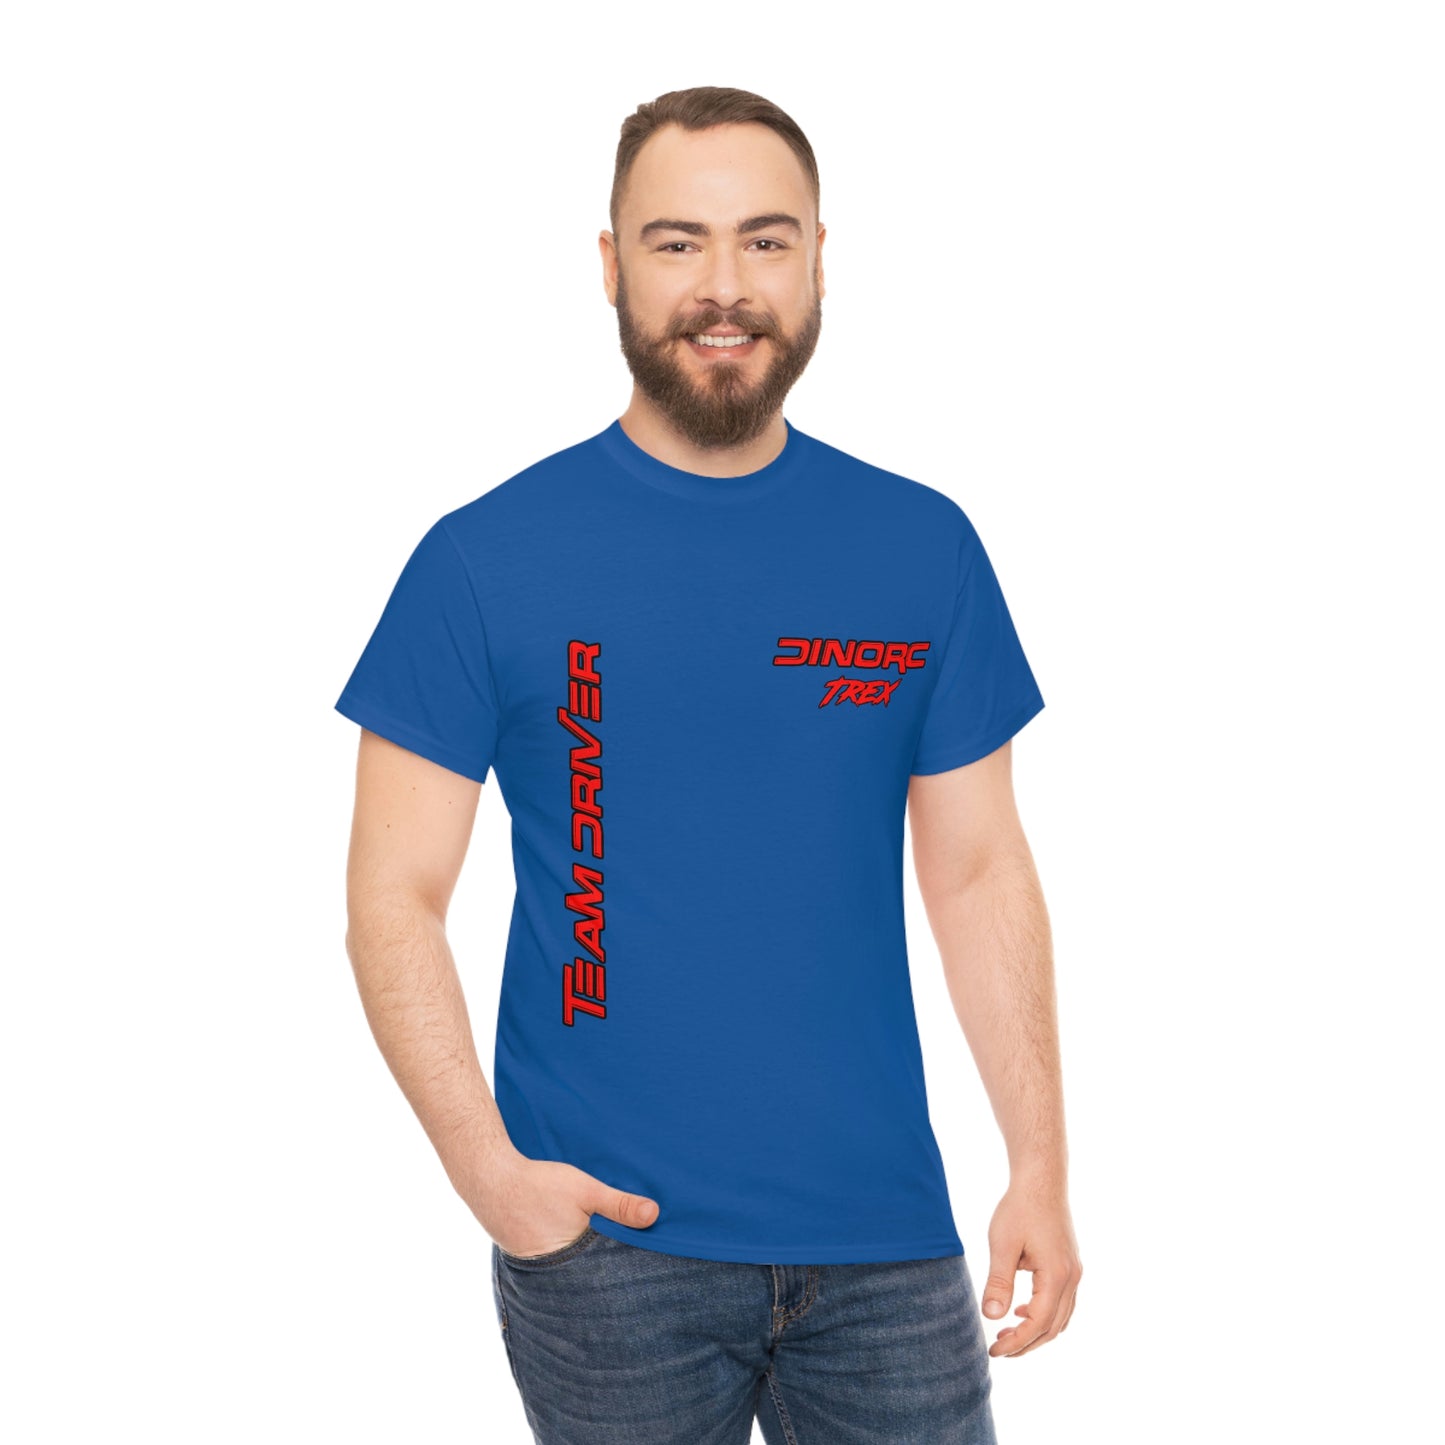 Team Driver Anthony Johnson (TRex) Front and Back DinoRc Logo T-Shirt S-5x 5 colors